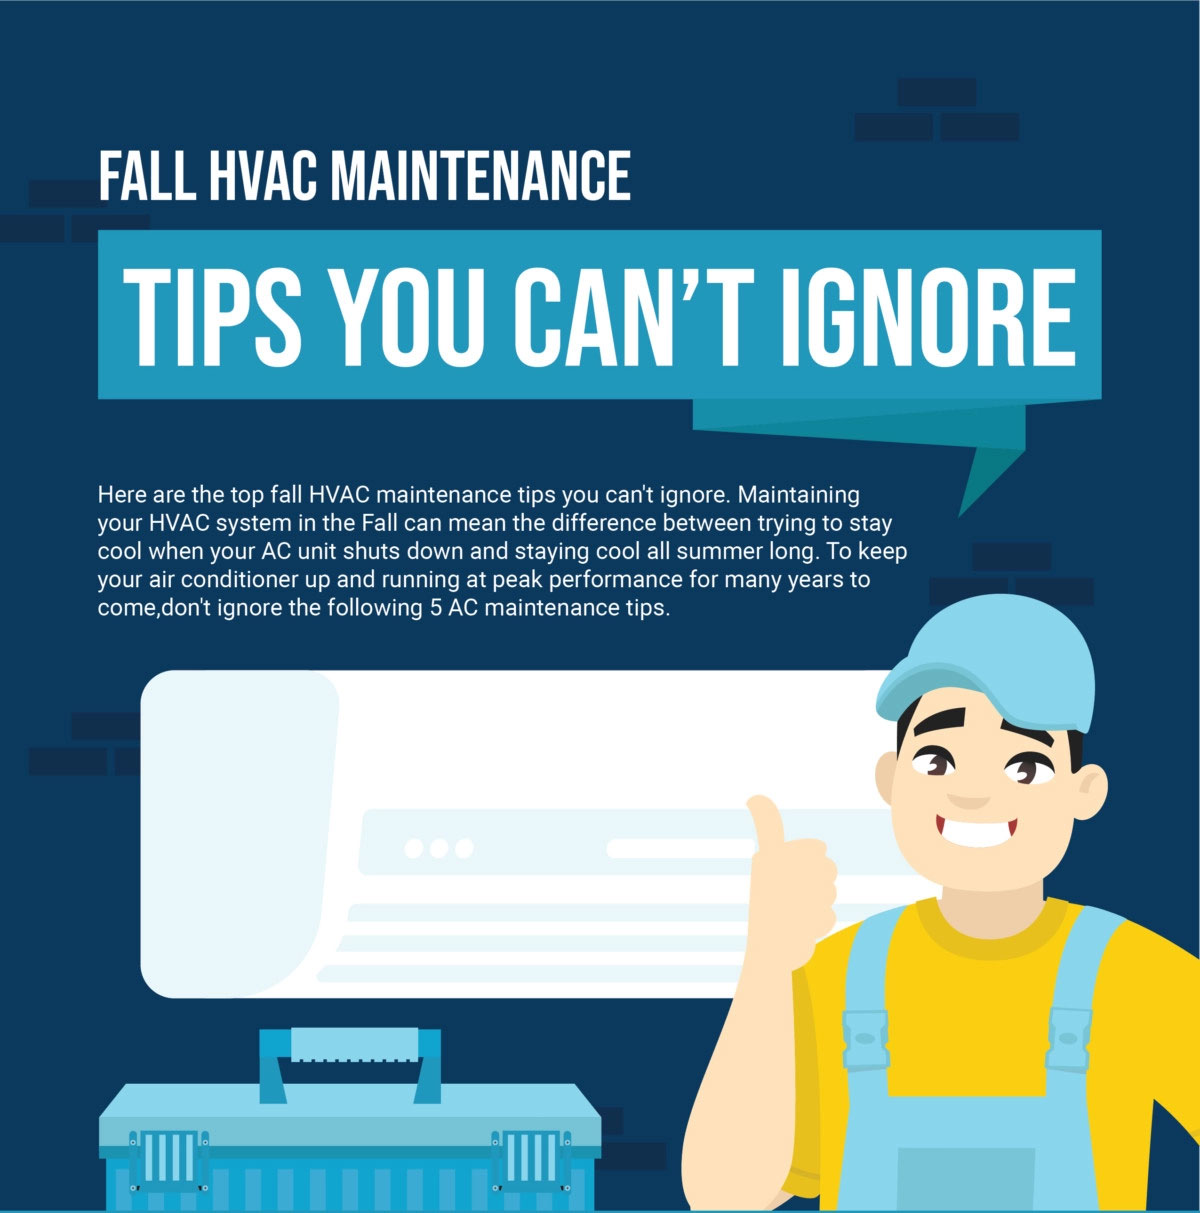 Fall HVAC Tips You Can’t Ignore infographic thumbnail